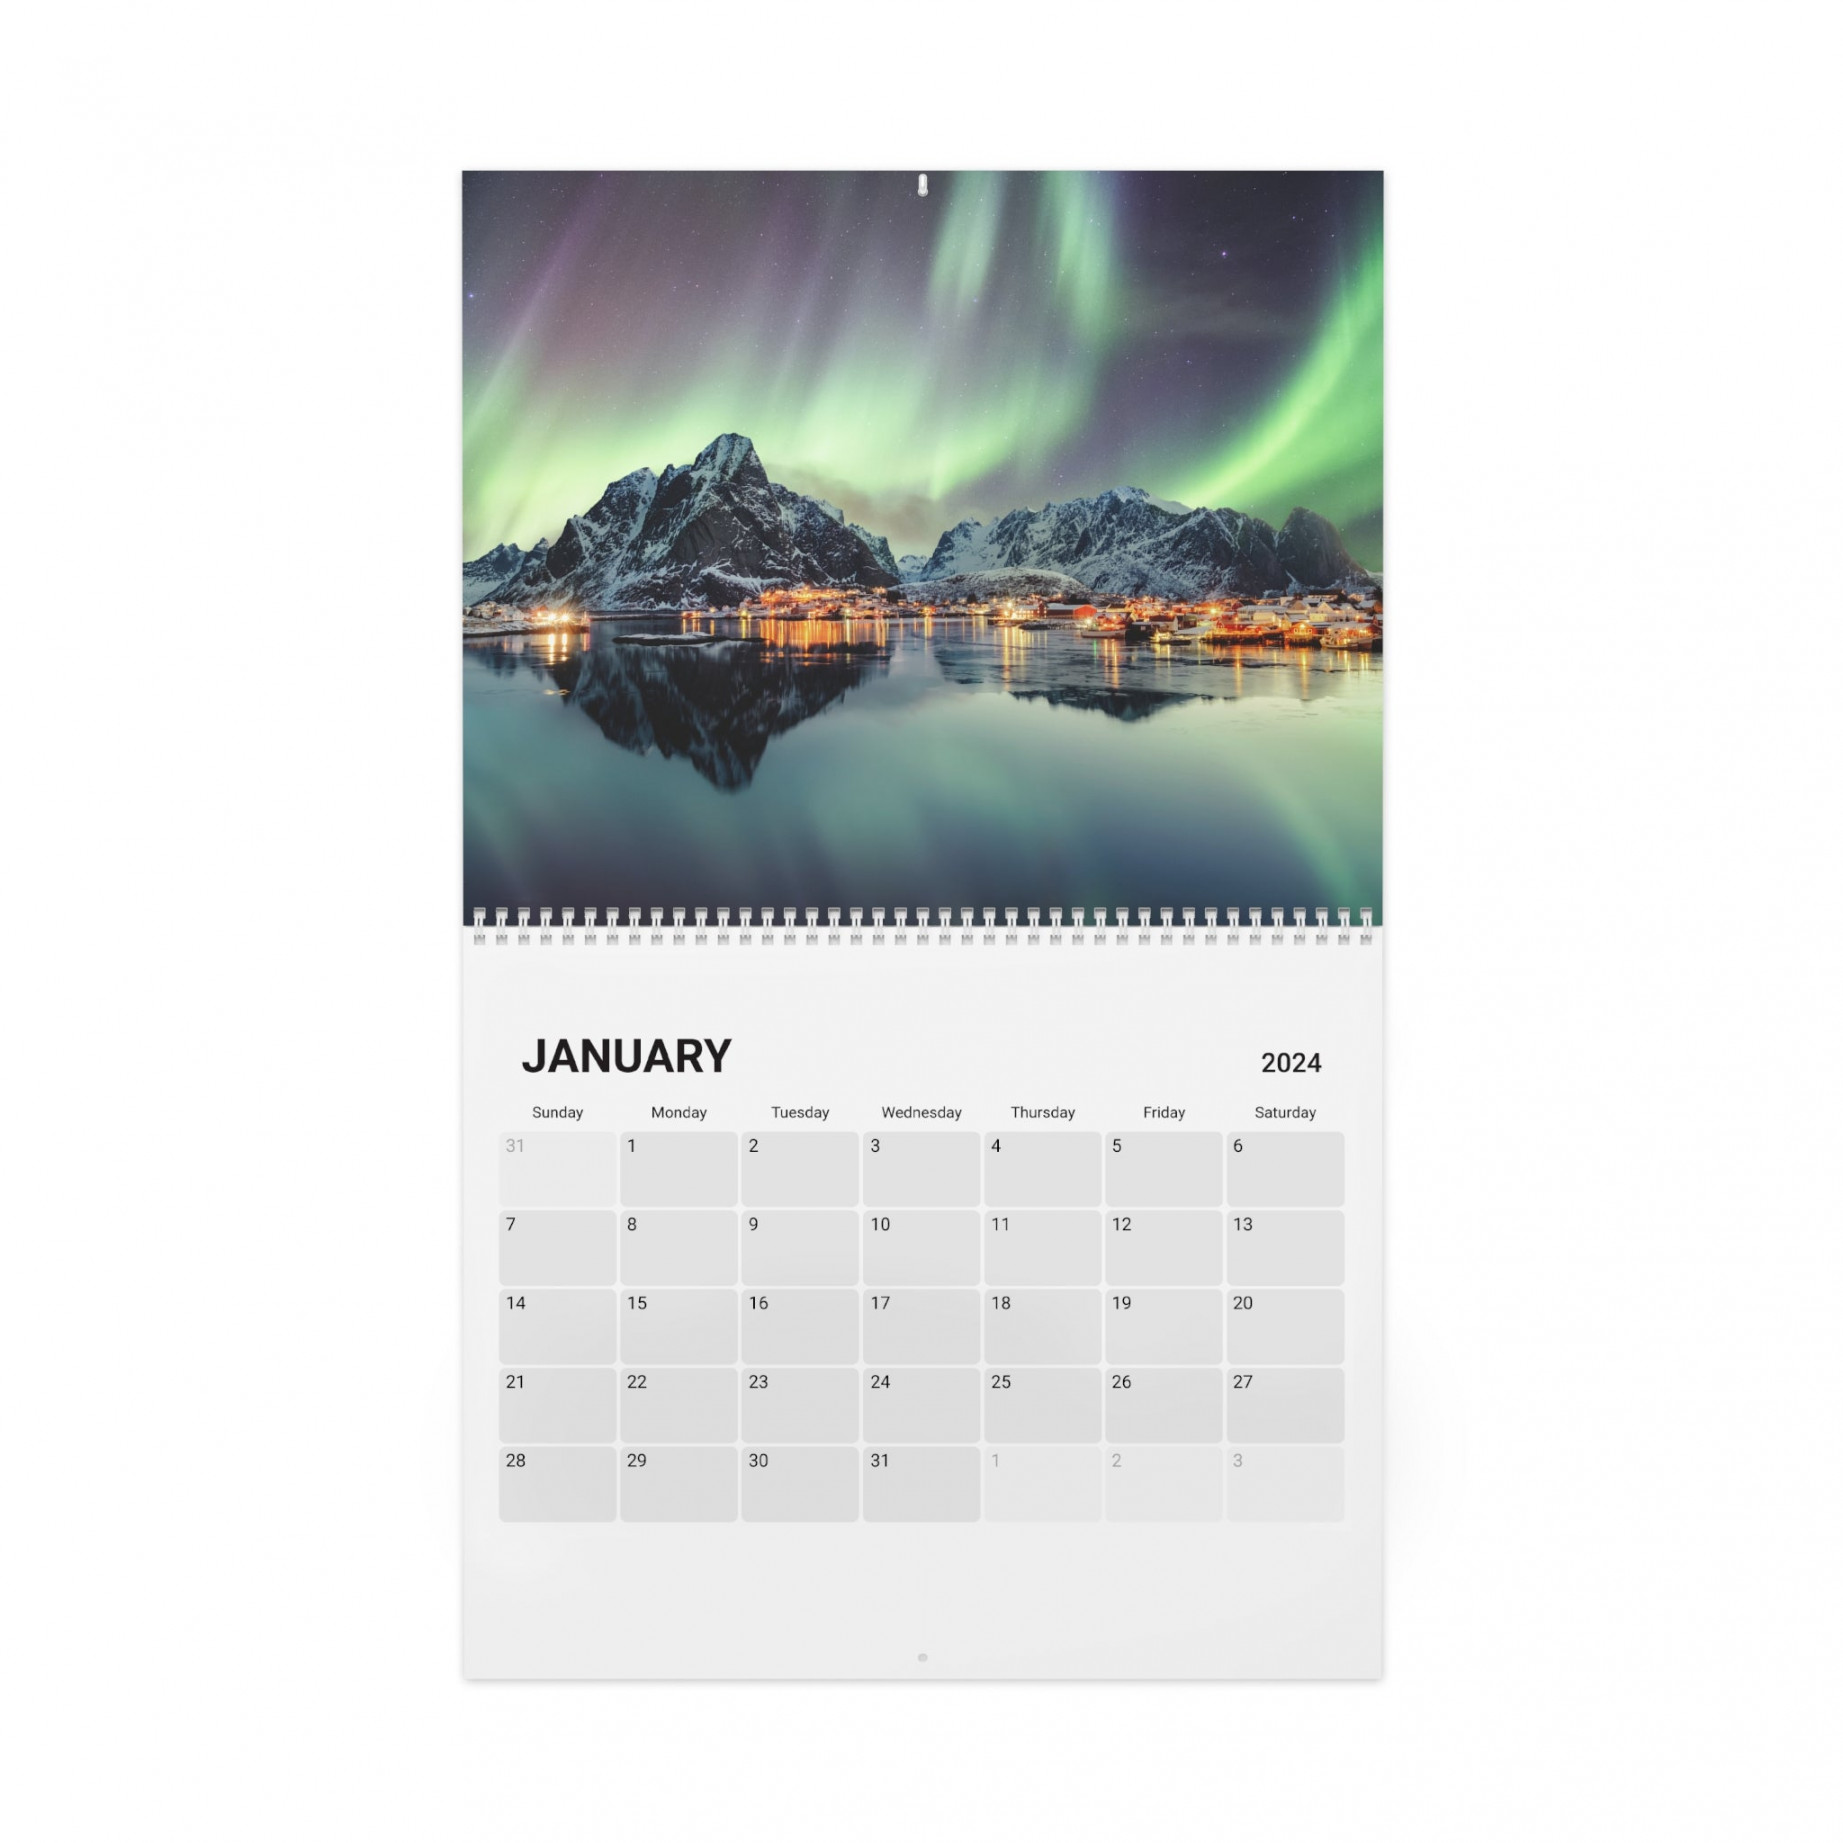 Calendar () Norway Wall Calender Norway Calender Northern Lights Calender Fjords Mountains Norwegian Calender Norwegian Norway Gift